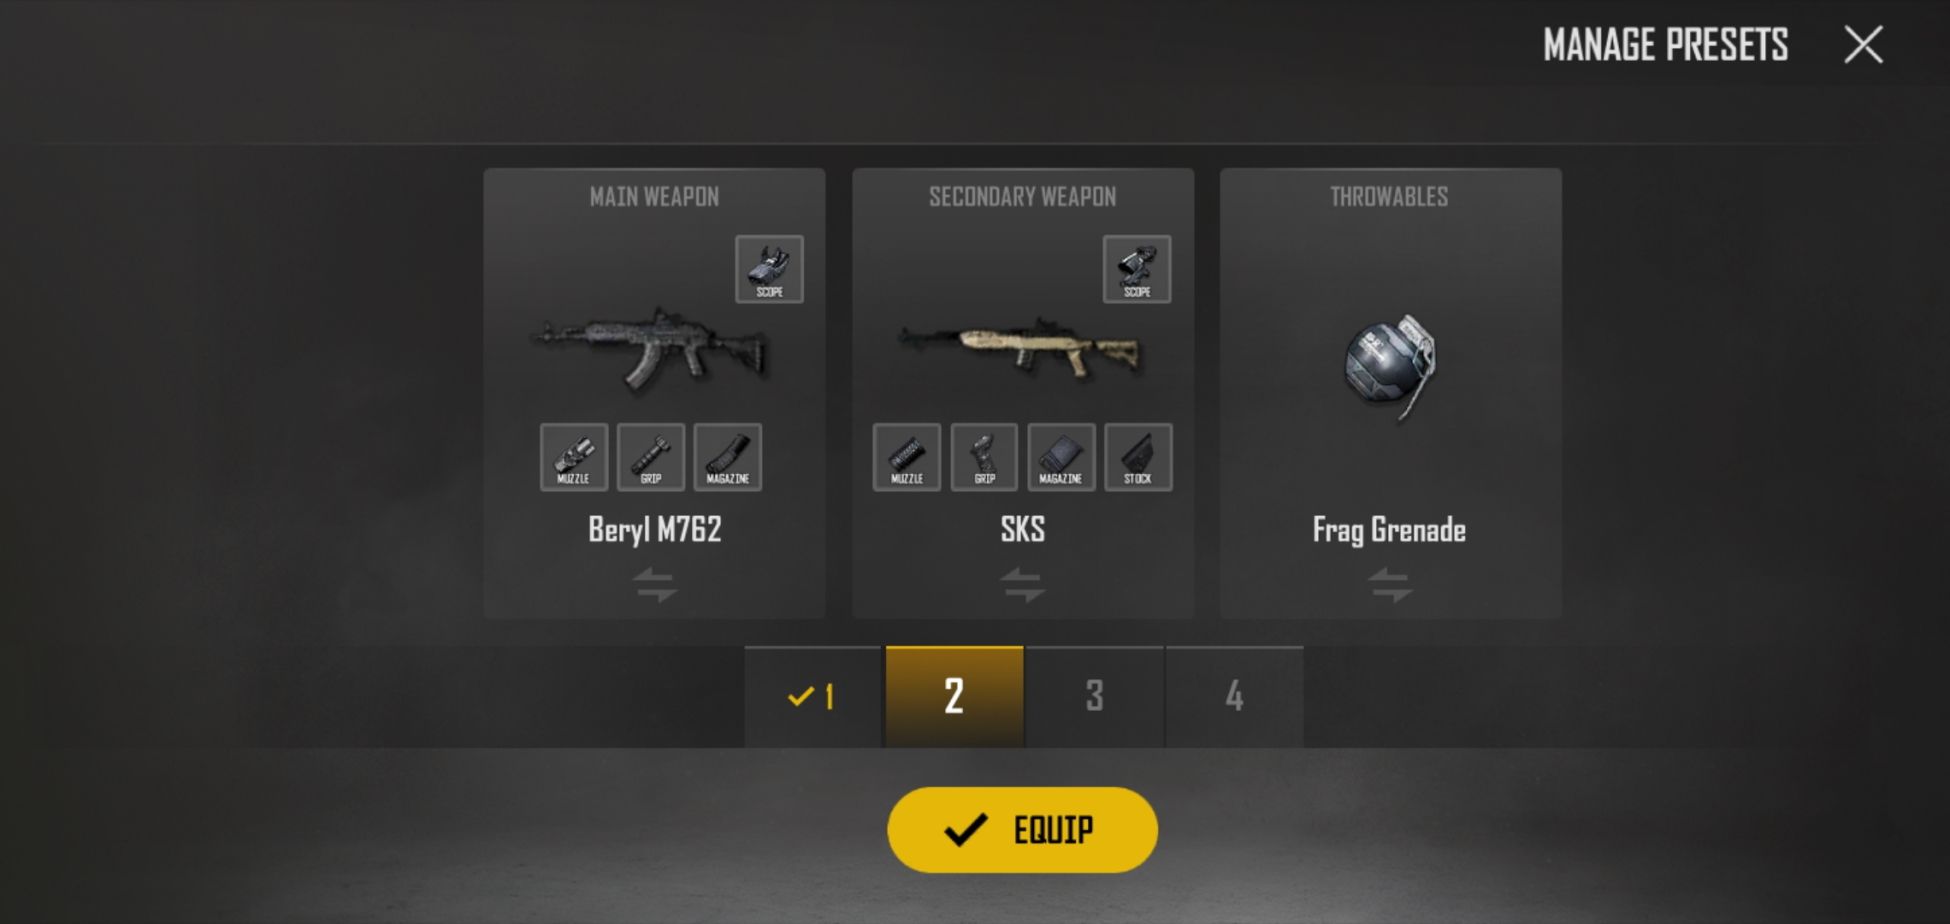 Toggling your weapon preset options in PUBG: New State